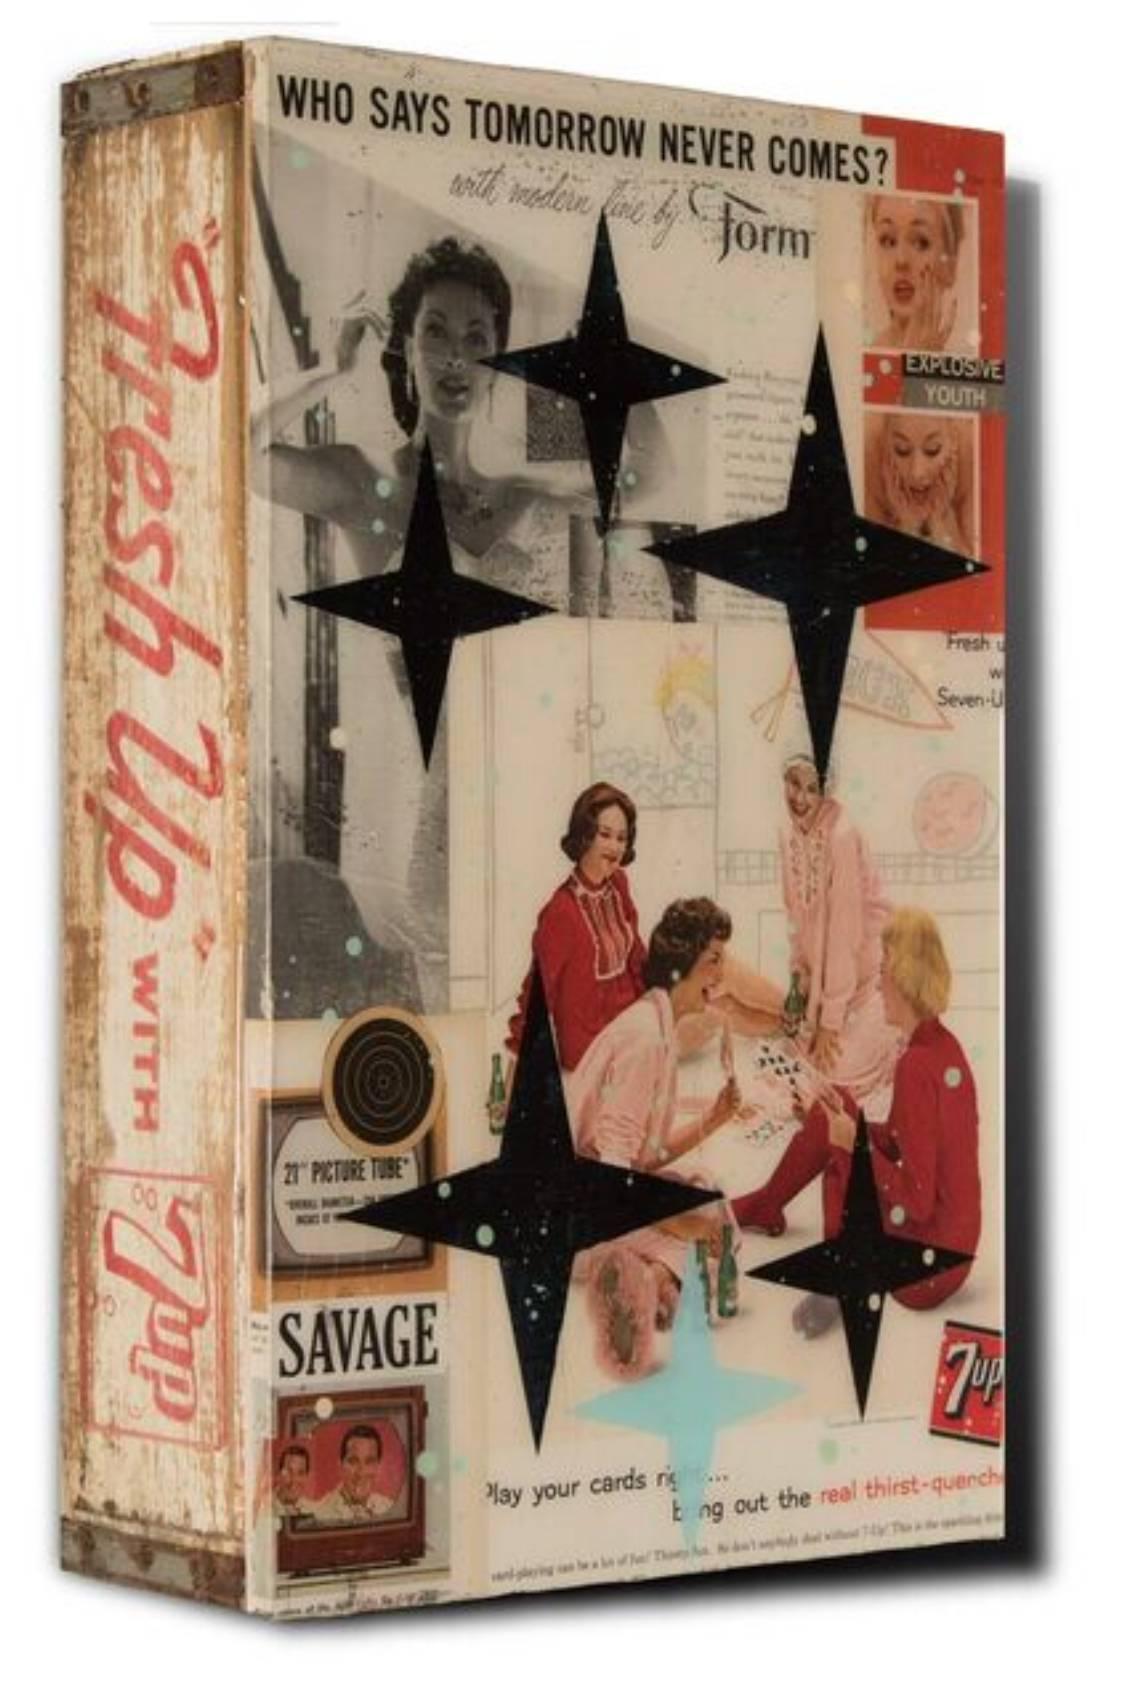 Who Says Tomorrow Never Comes, Pop Art Collage & Painting on Vintage Soda Crate - Mixed Media Art by John Joseph Hanright